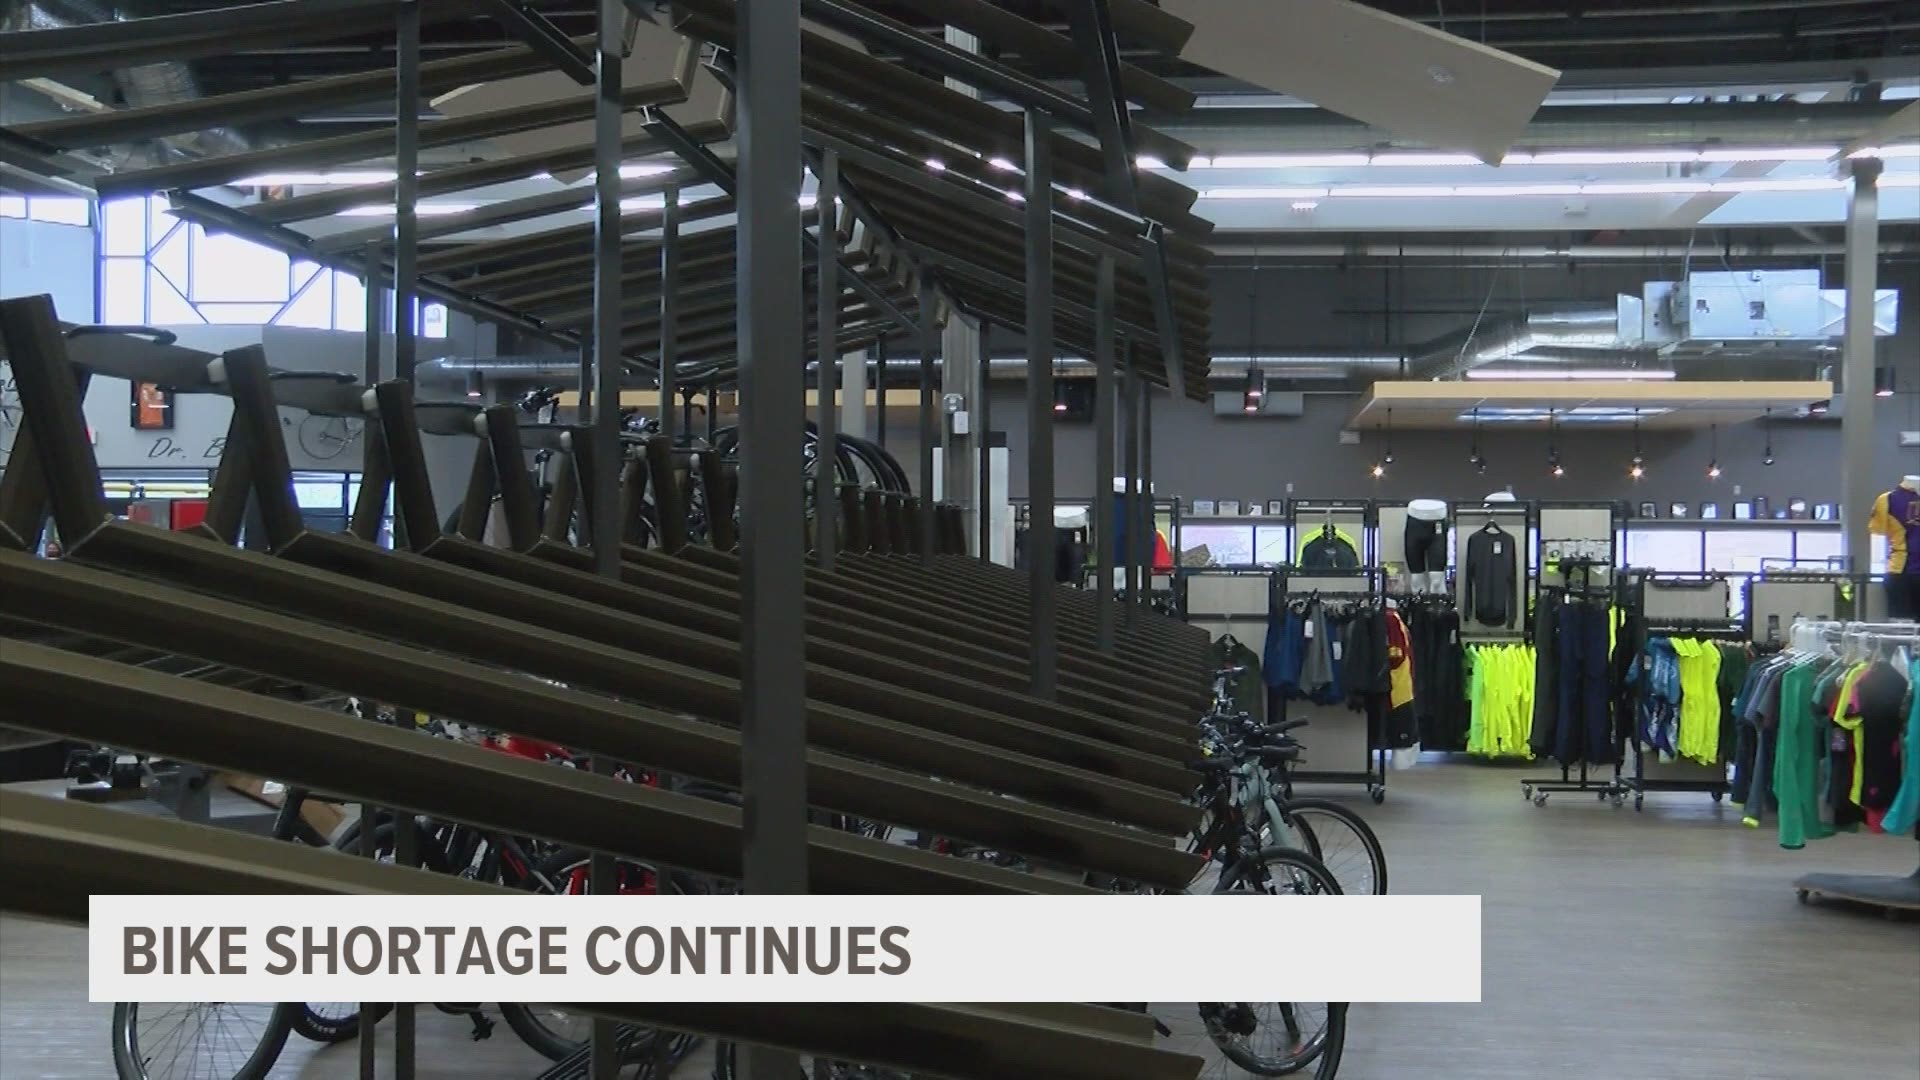 One local retailer is having trouble keeping bikes in stocks with more than 10,000 bikes on backorder.